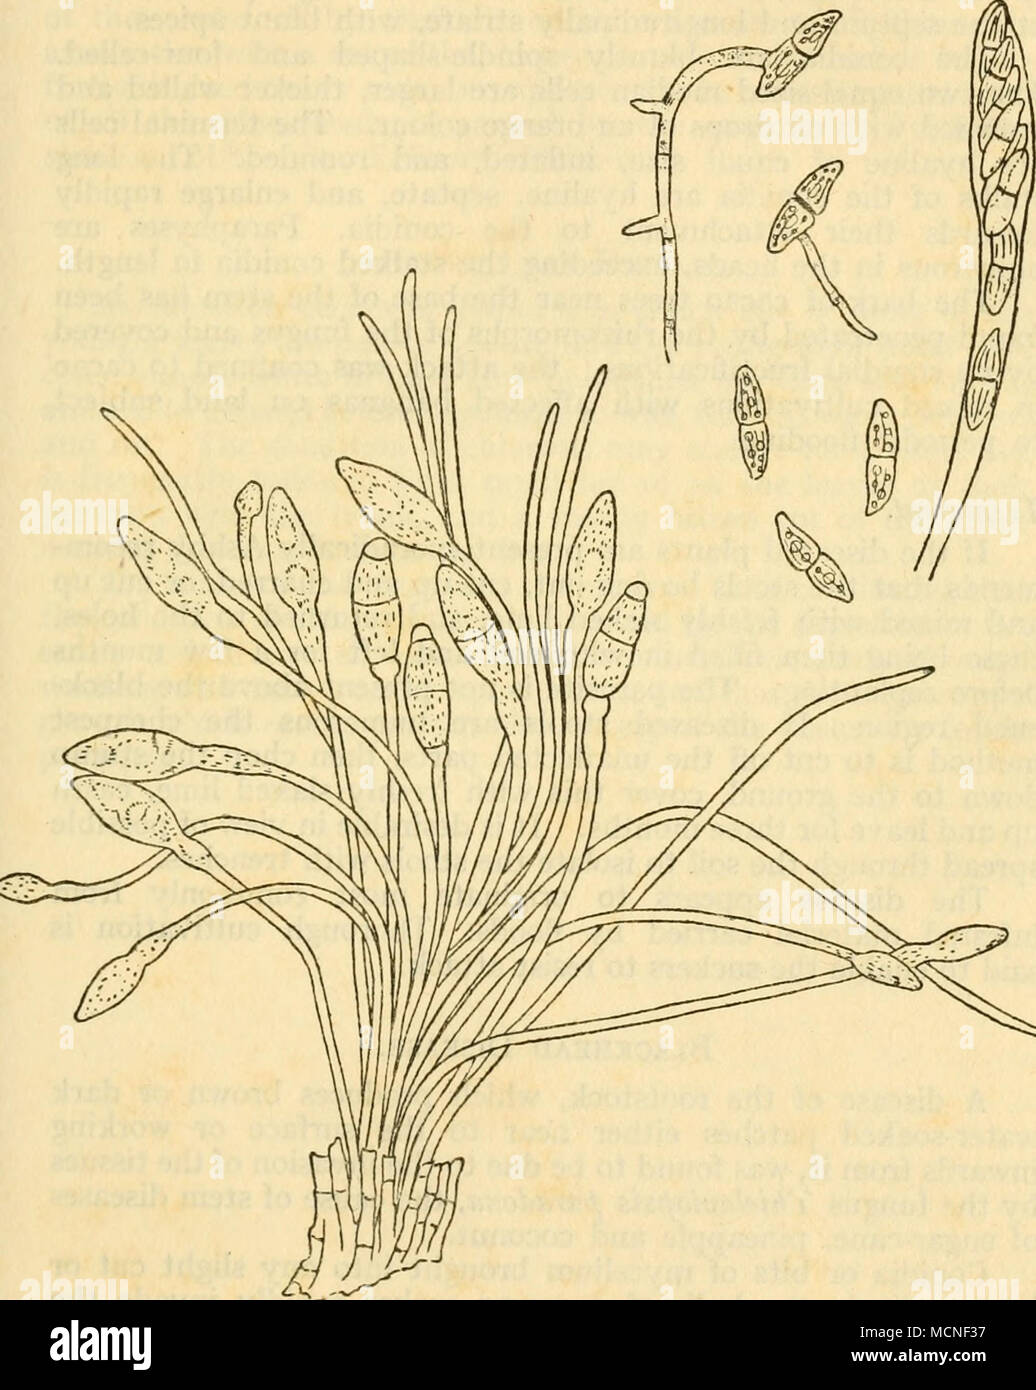 . Fig. 98 SpHAEROSTILBE MUSARUM, CONIDIA, ASCUS AND ASCOSPORES Bull. 6, Dept. Agri., Jamaica The conidial stage occurs on small yellow or orange cushions up to 2 mm. diameter, bearing one or more slender white stalks furnished with a brown or brownish red spherical head or ending in a point. Stock Photo